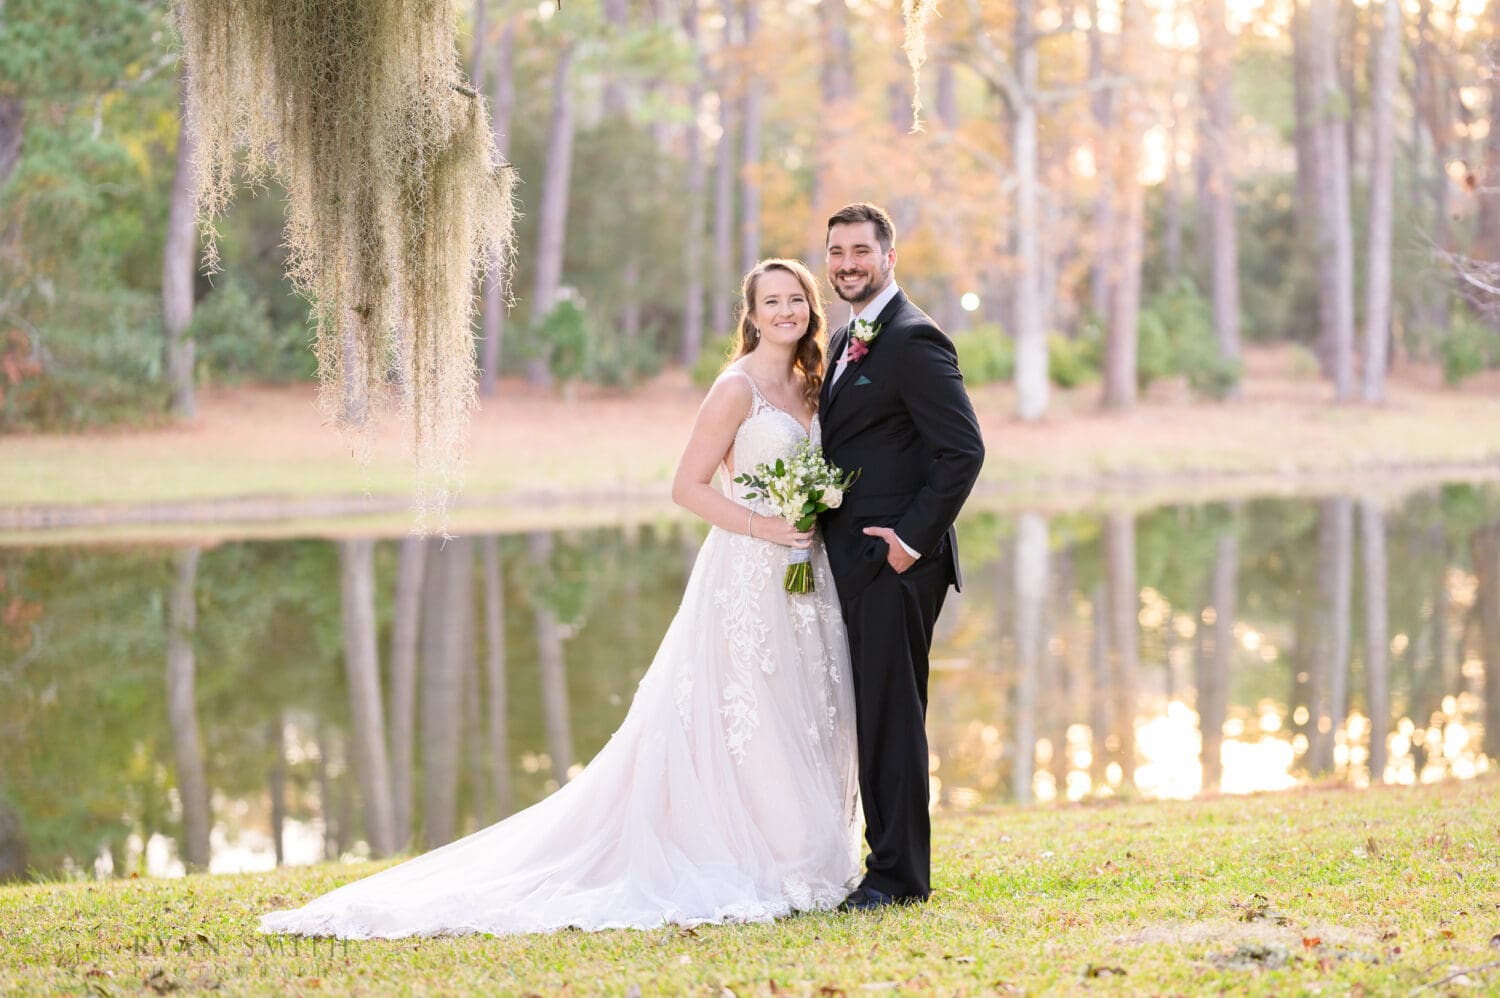 Portraits by the lake in the sunset - Brookgreen Gardens